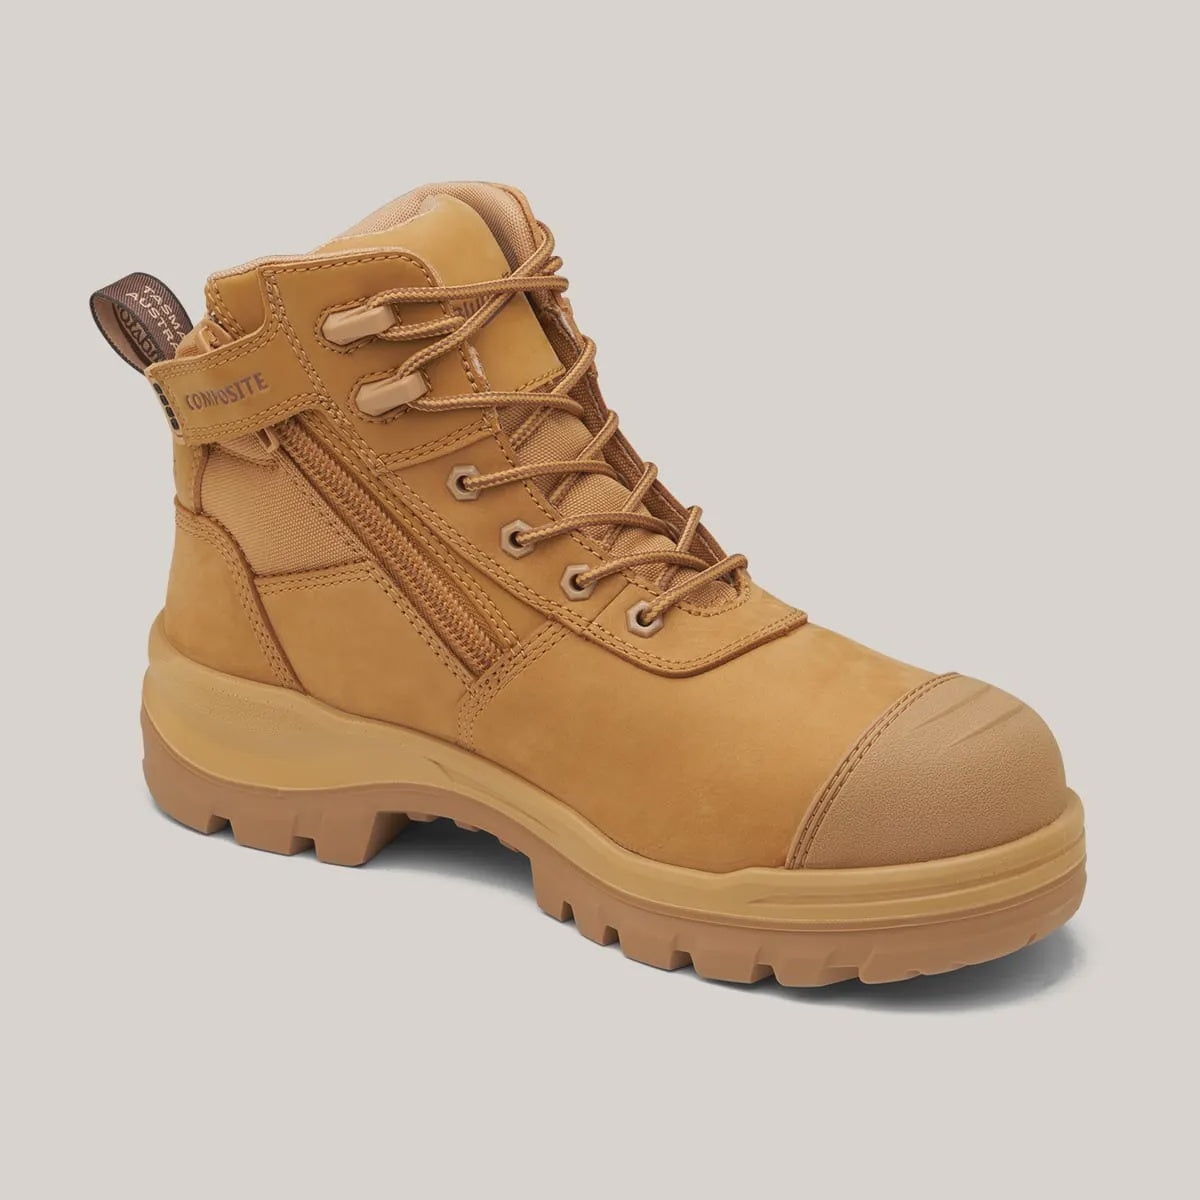 Blundstone - 8550 Rotoflex Wheat Zip Sided Safety Boot